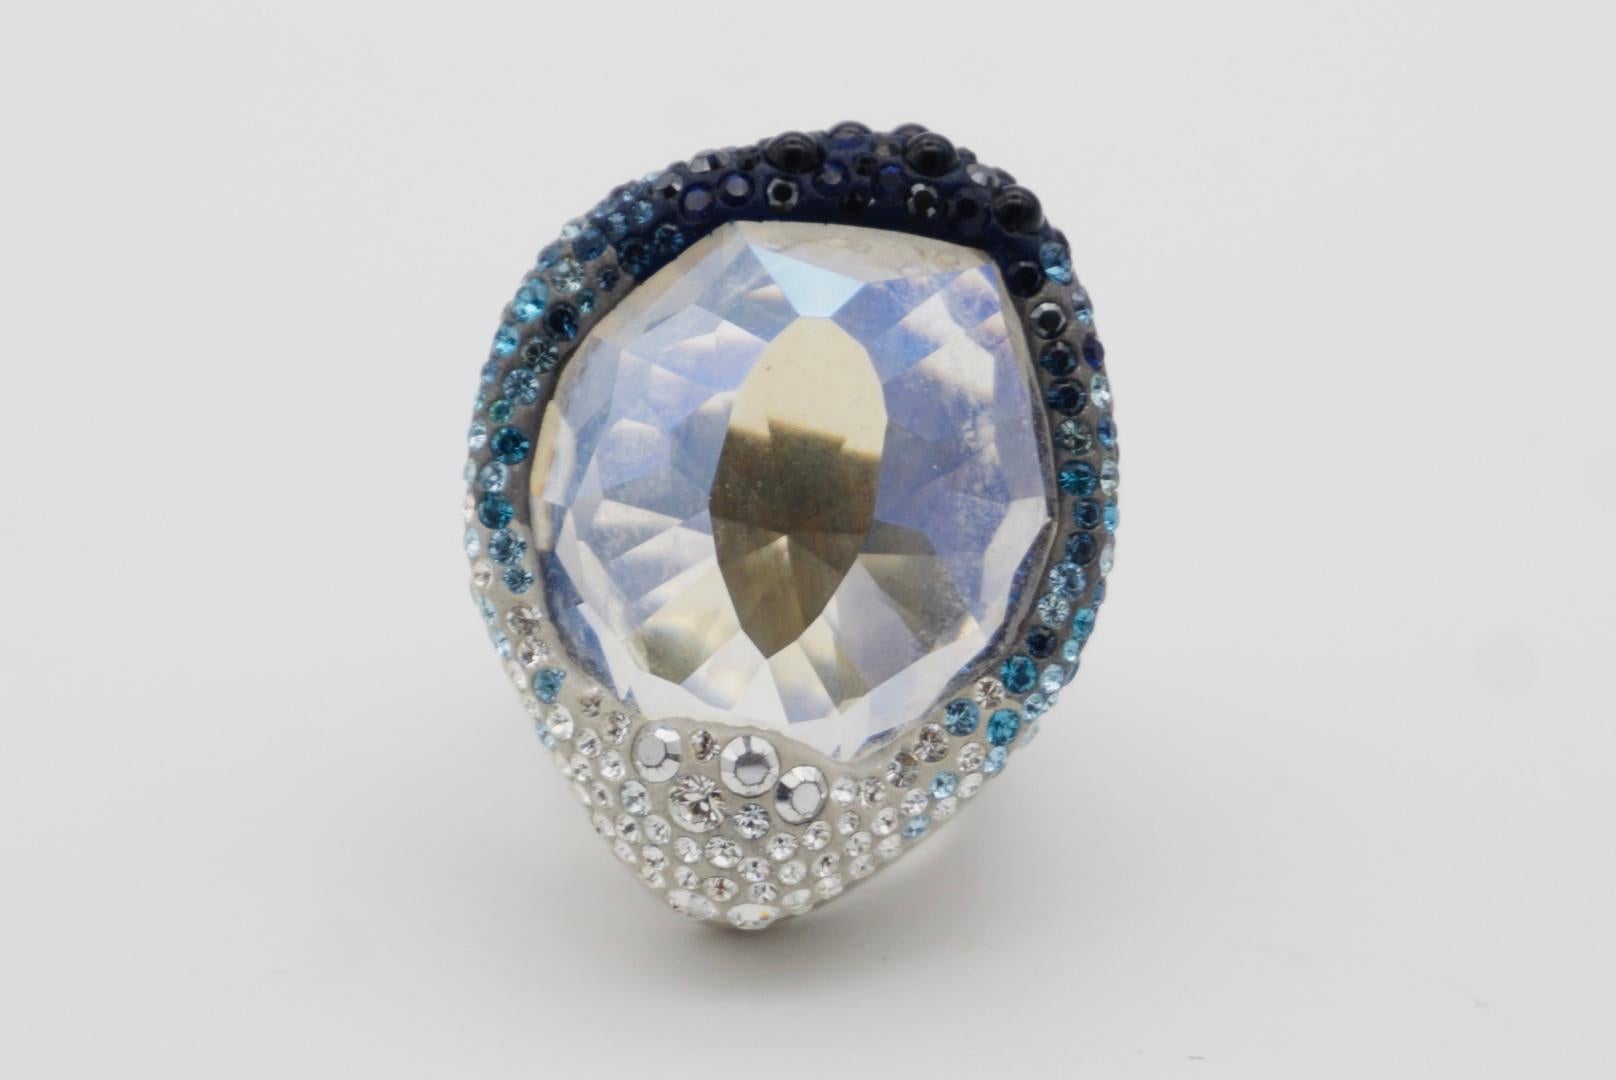 Swarovski Hyacinth Blue Crystals Large Nirvana Cocktail Ring, Size N, 55, White In Excellent Condition For Sale In Wokingham, England